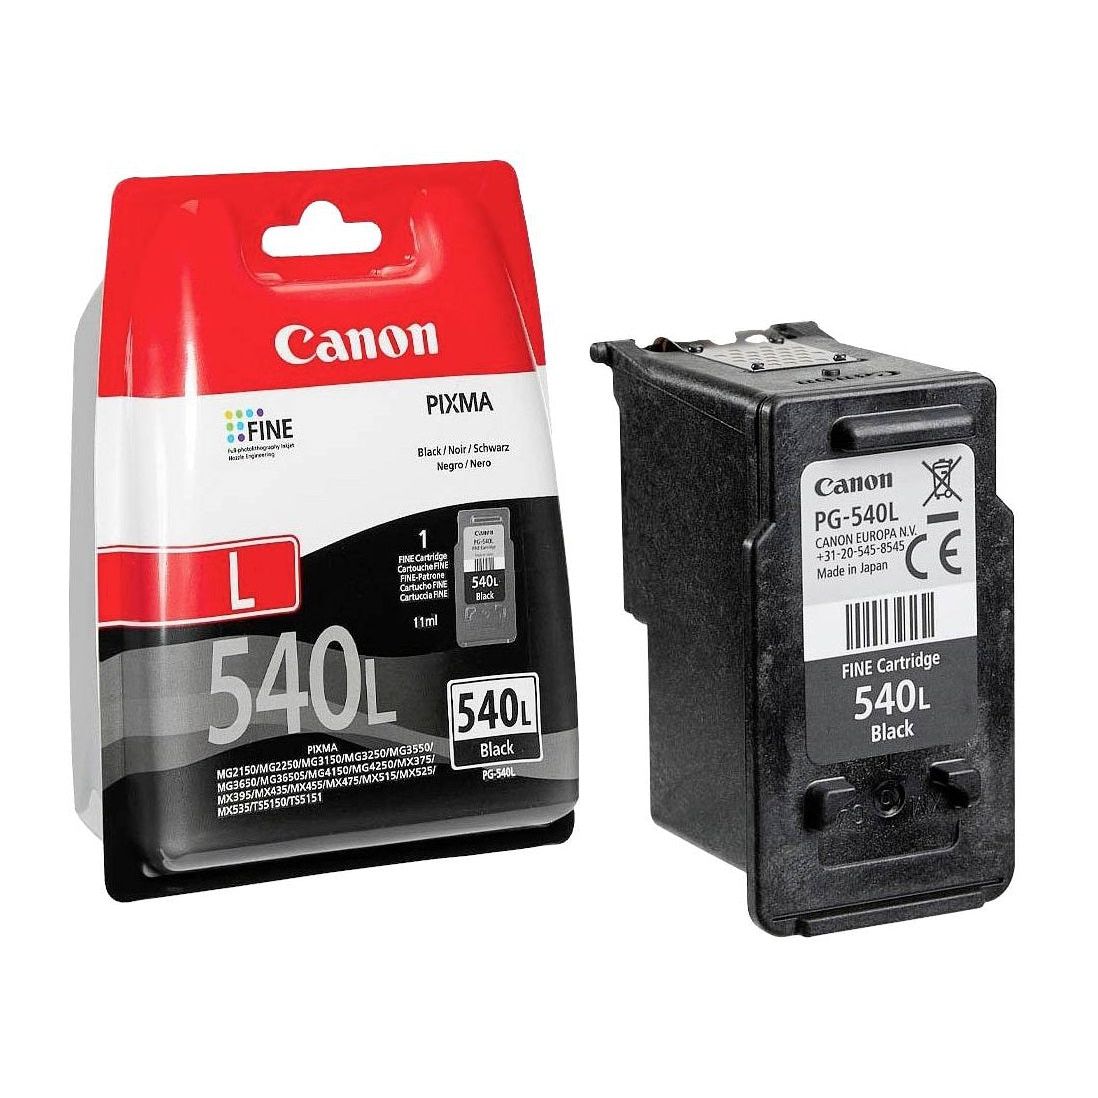 Canon PG-540L High Yield Ink Cartridge - Black | SCAN2446 from Canon - DID Electrical